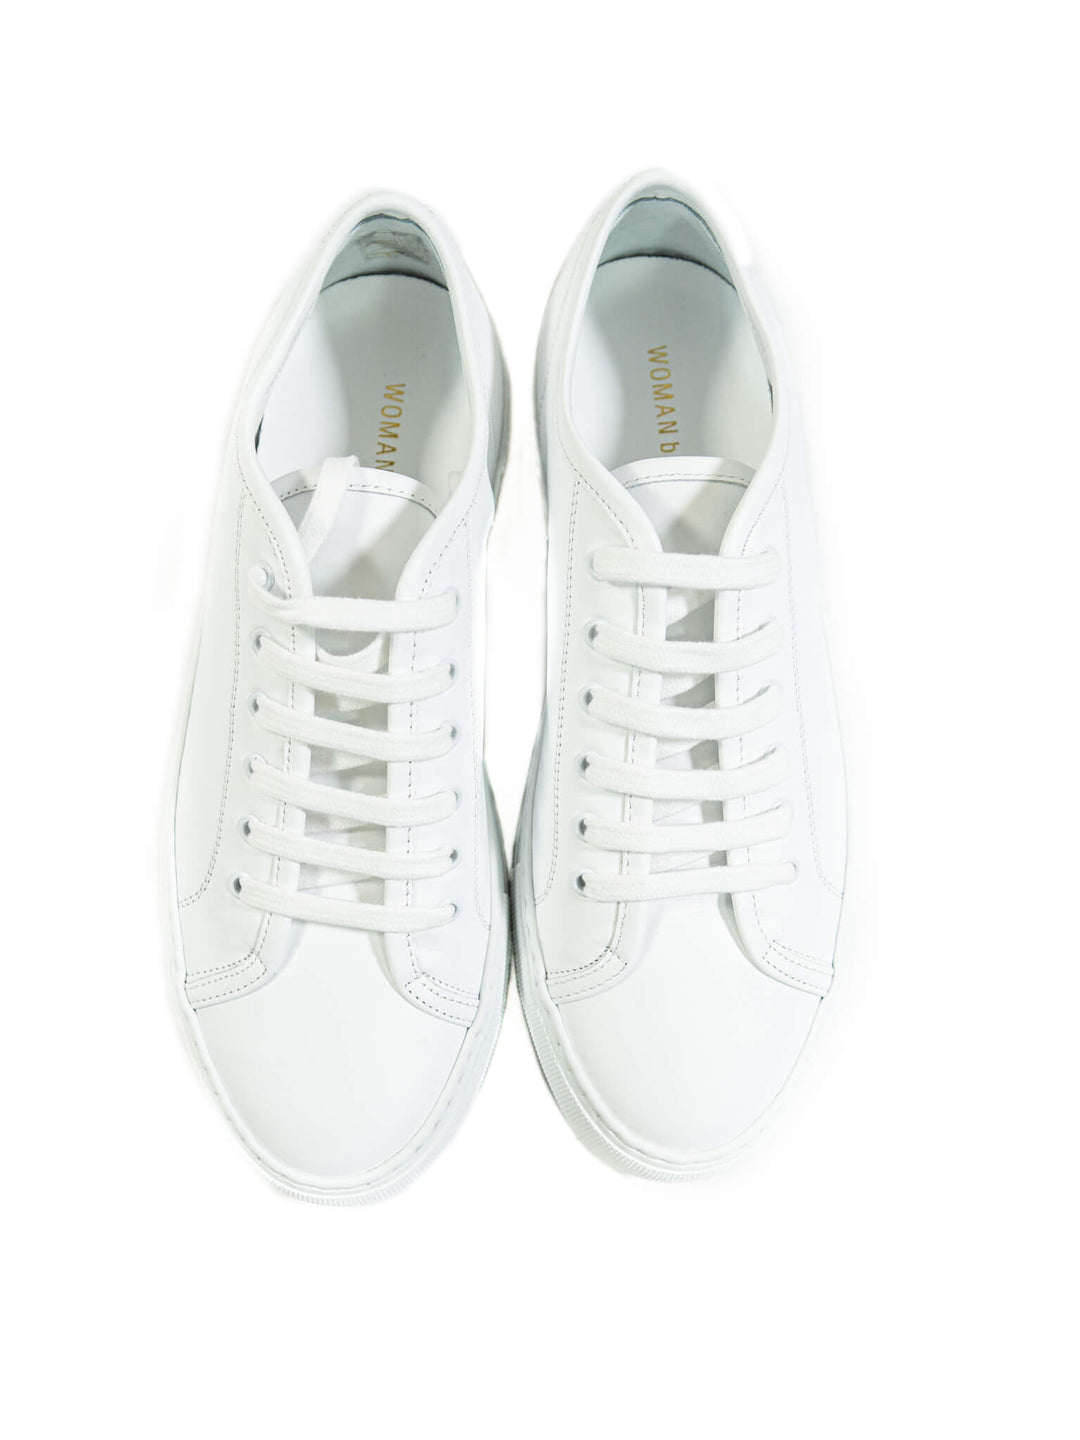 COMMON PROJECTS TOURNAMENT LEATHER SNEAKER - WHITE